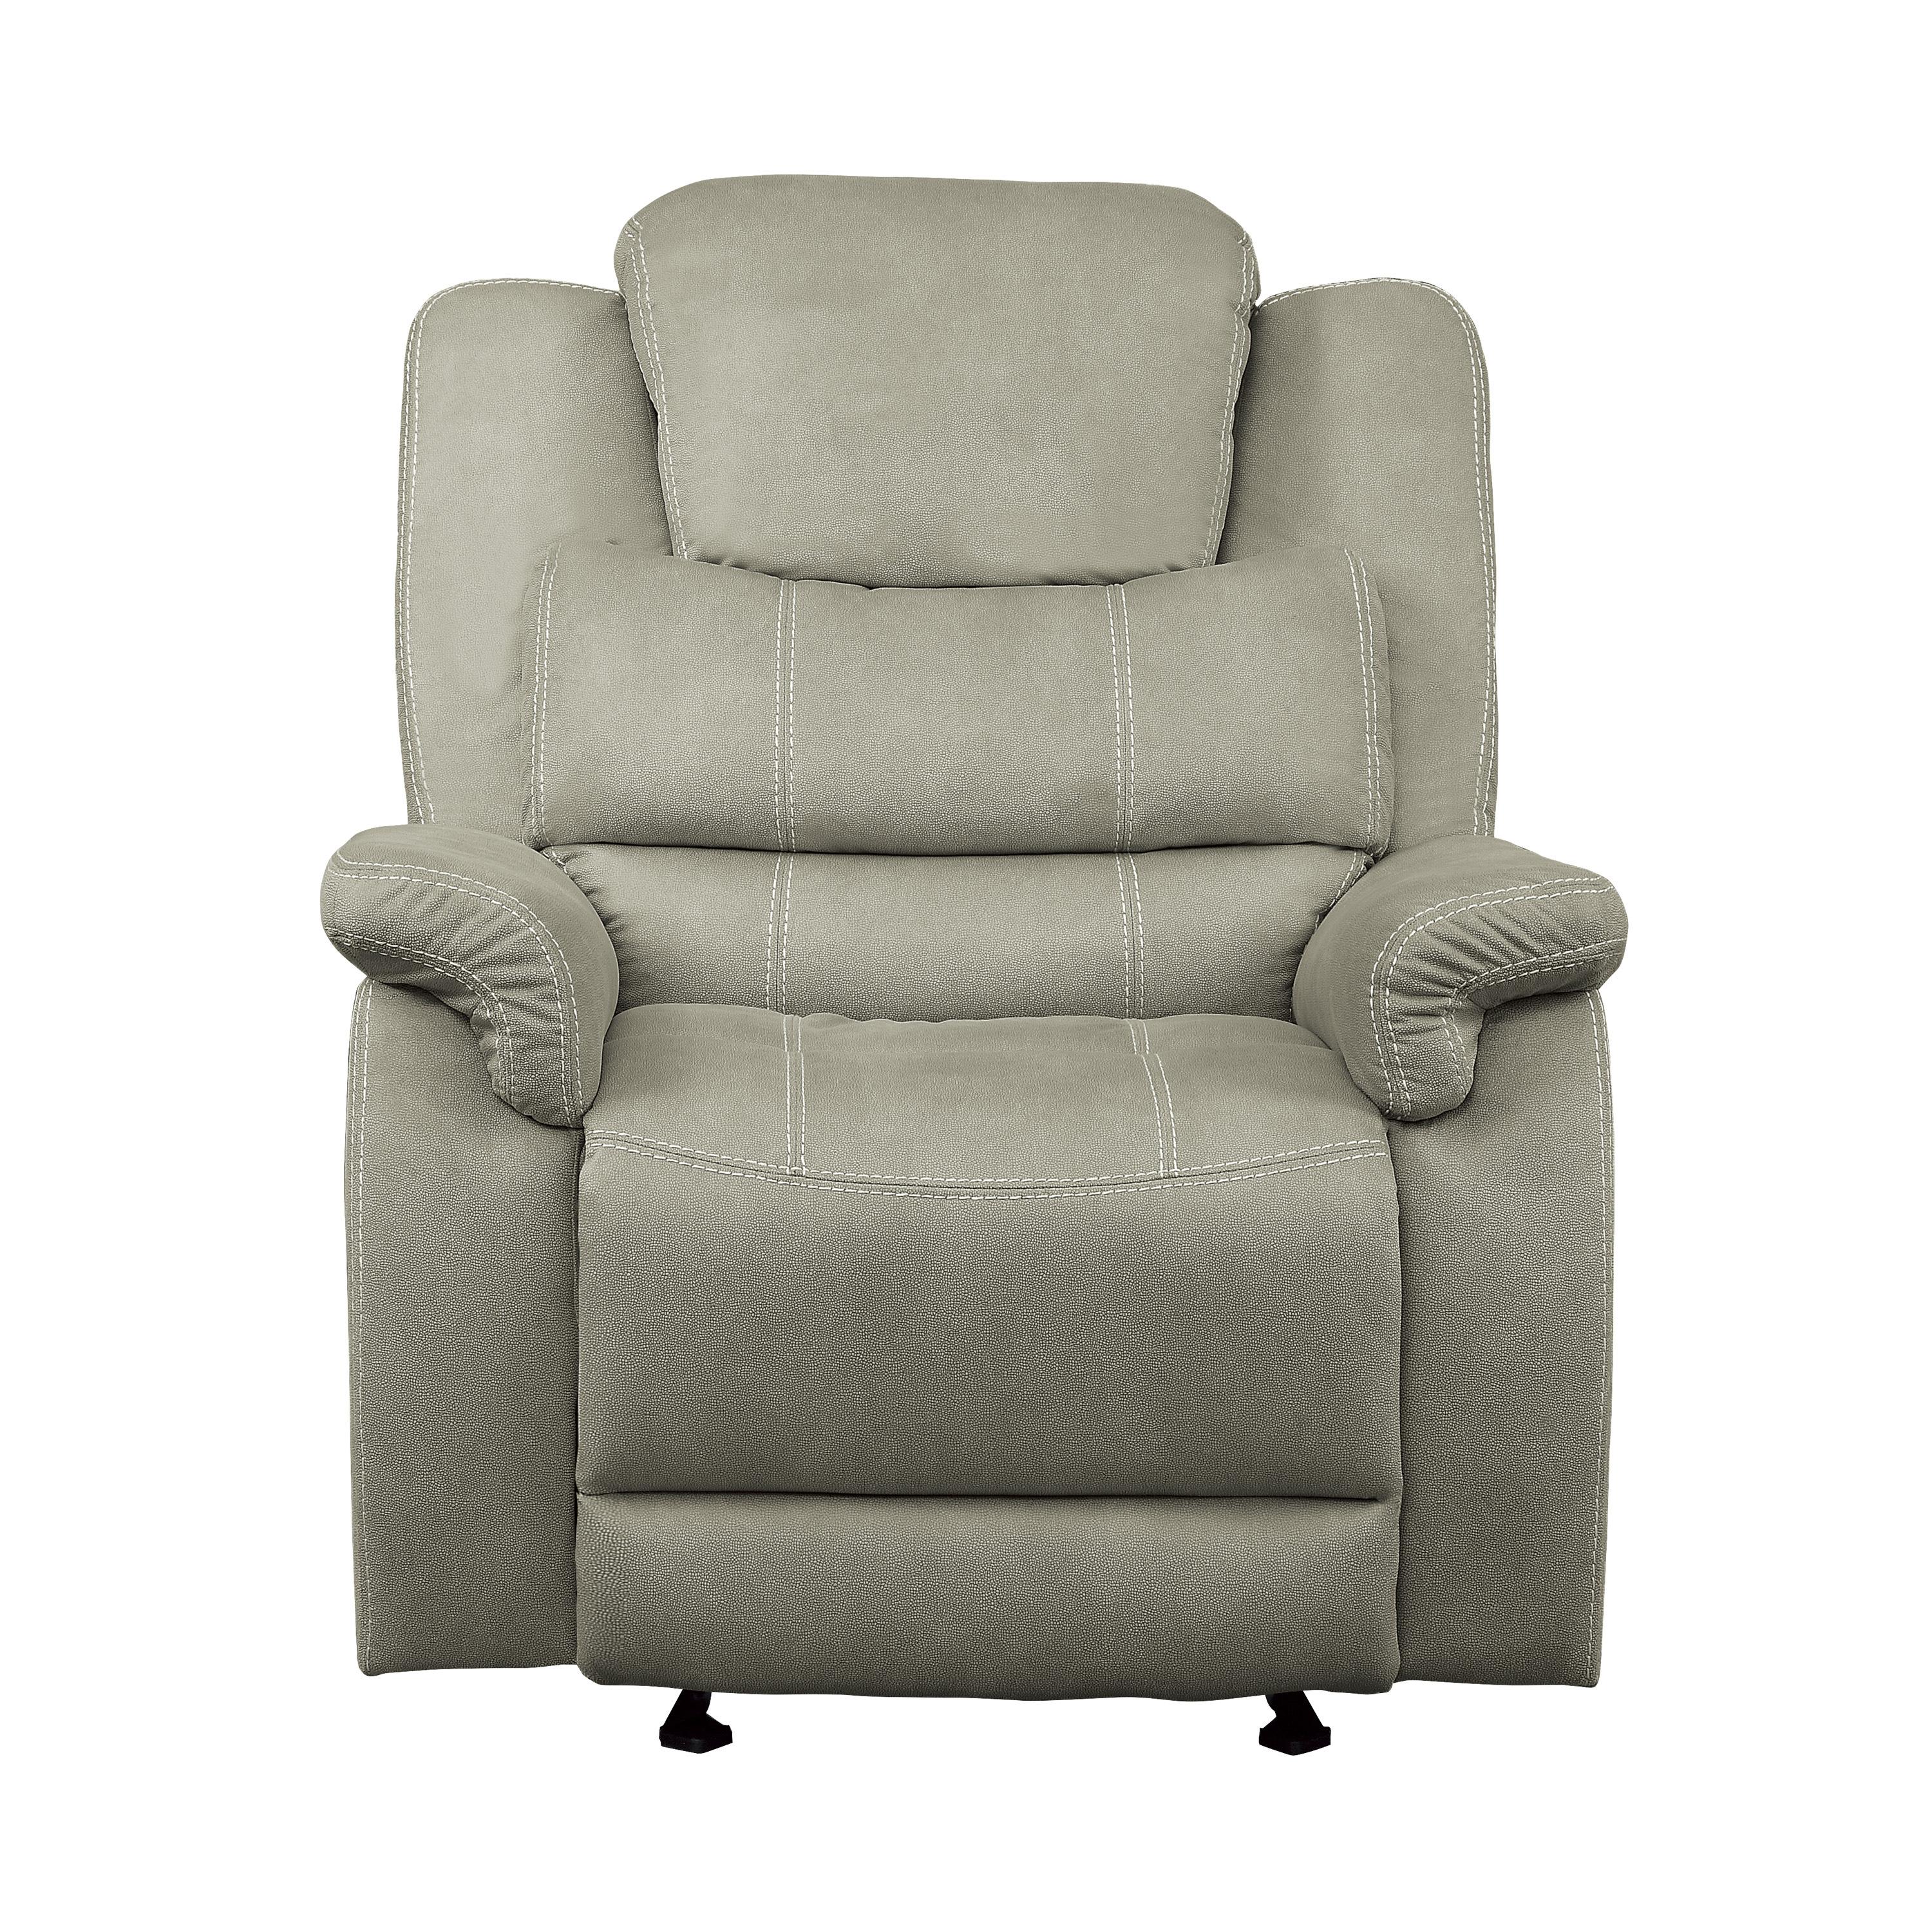 

    
Transitional Gray Microfiber Reclining Chair Homelegance 9848GY-1 Shola
